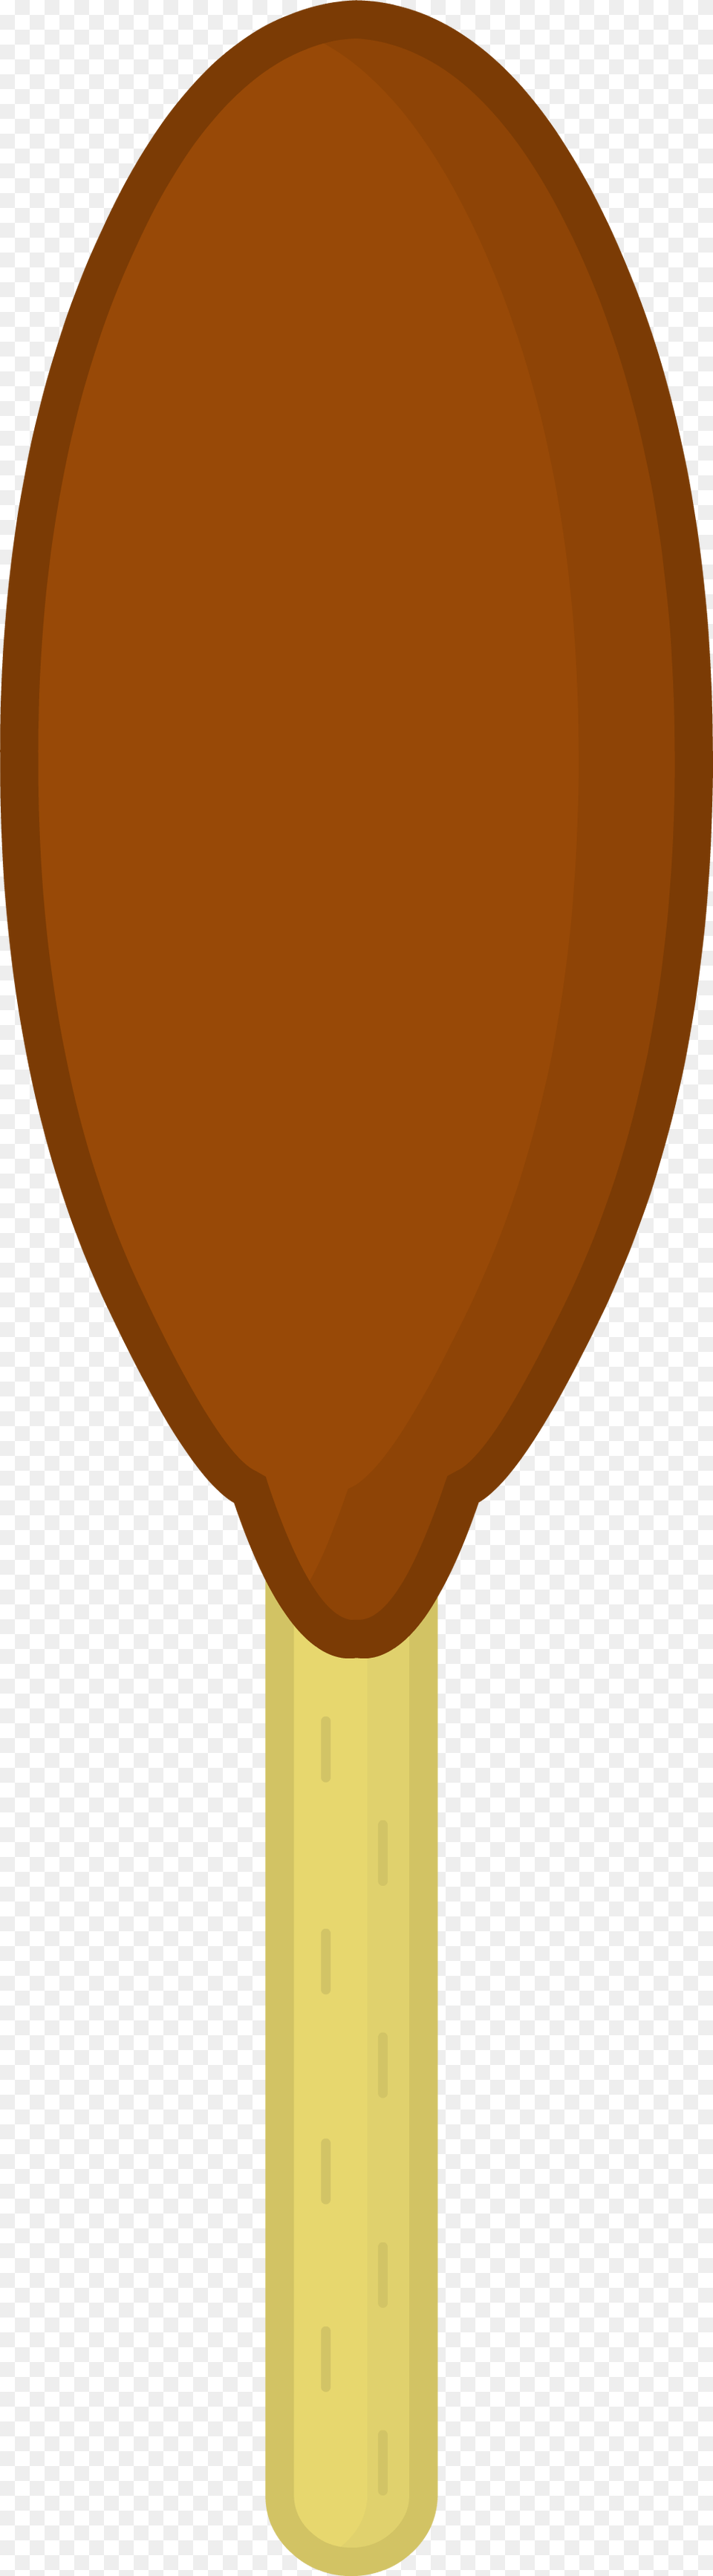 New Corn Dog Body Bfdi Corn Dog, Cutlery, Spoon, Kitchen Utensil, Wooden Spoon Free Png Download